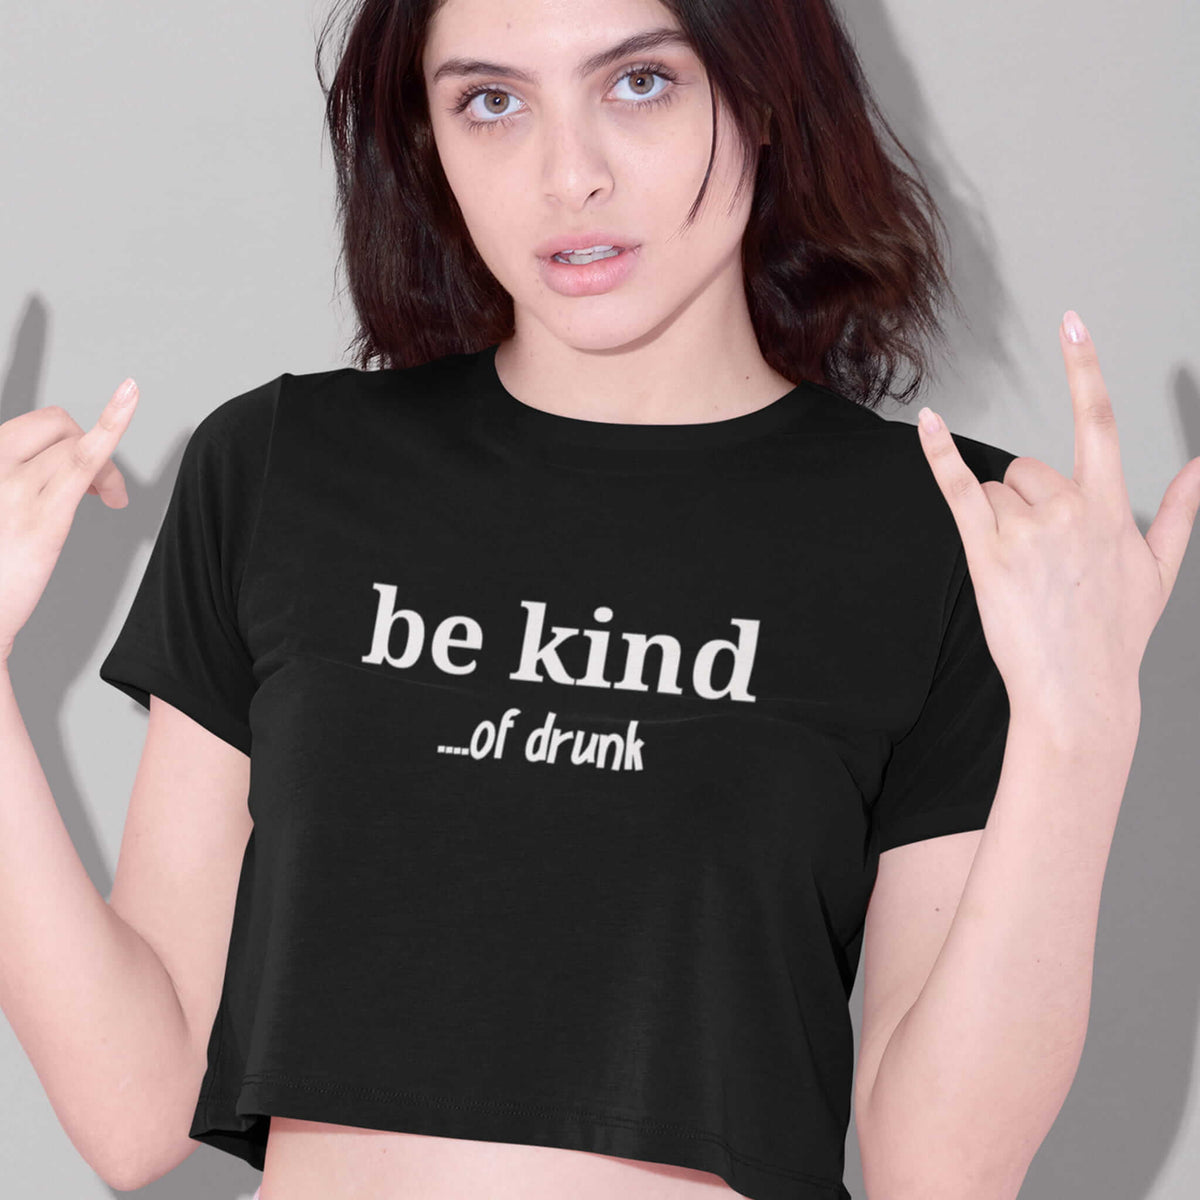 Girl with attitude wearing a Be Kind of drunk crop top